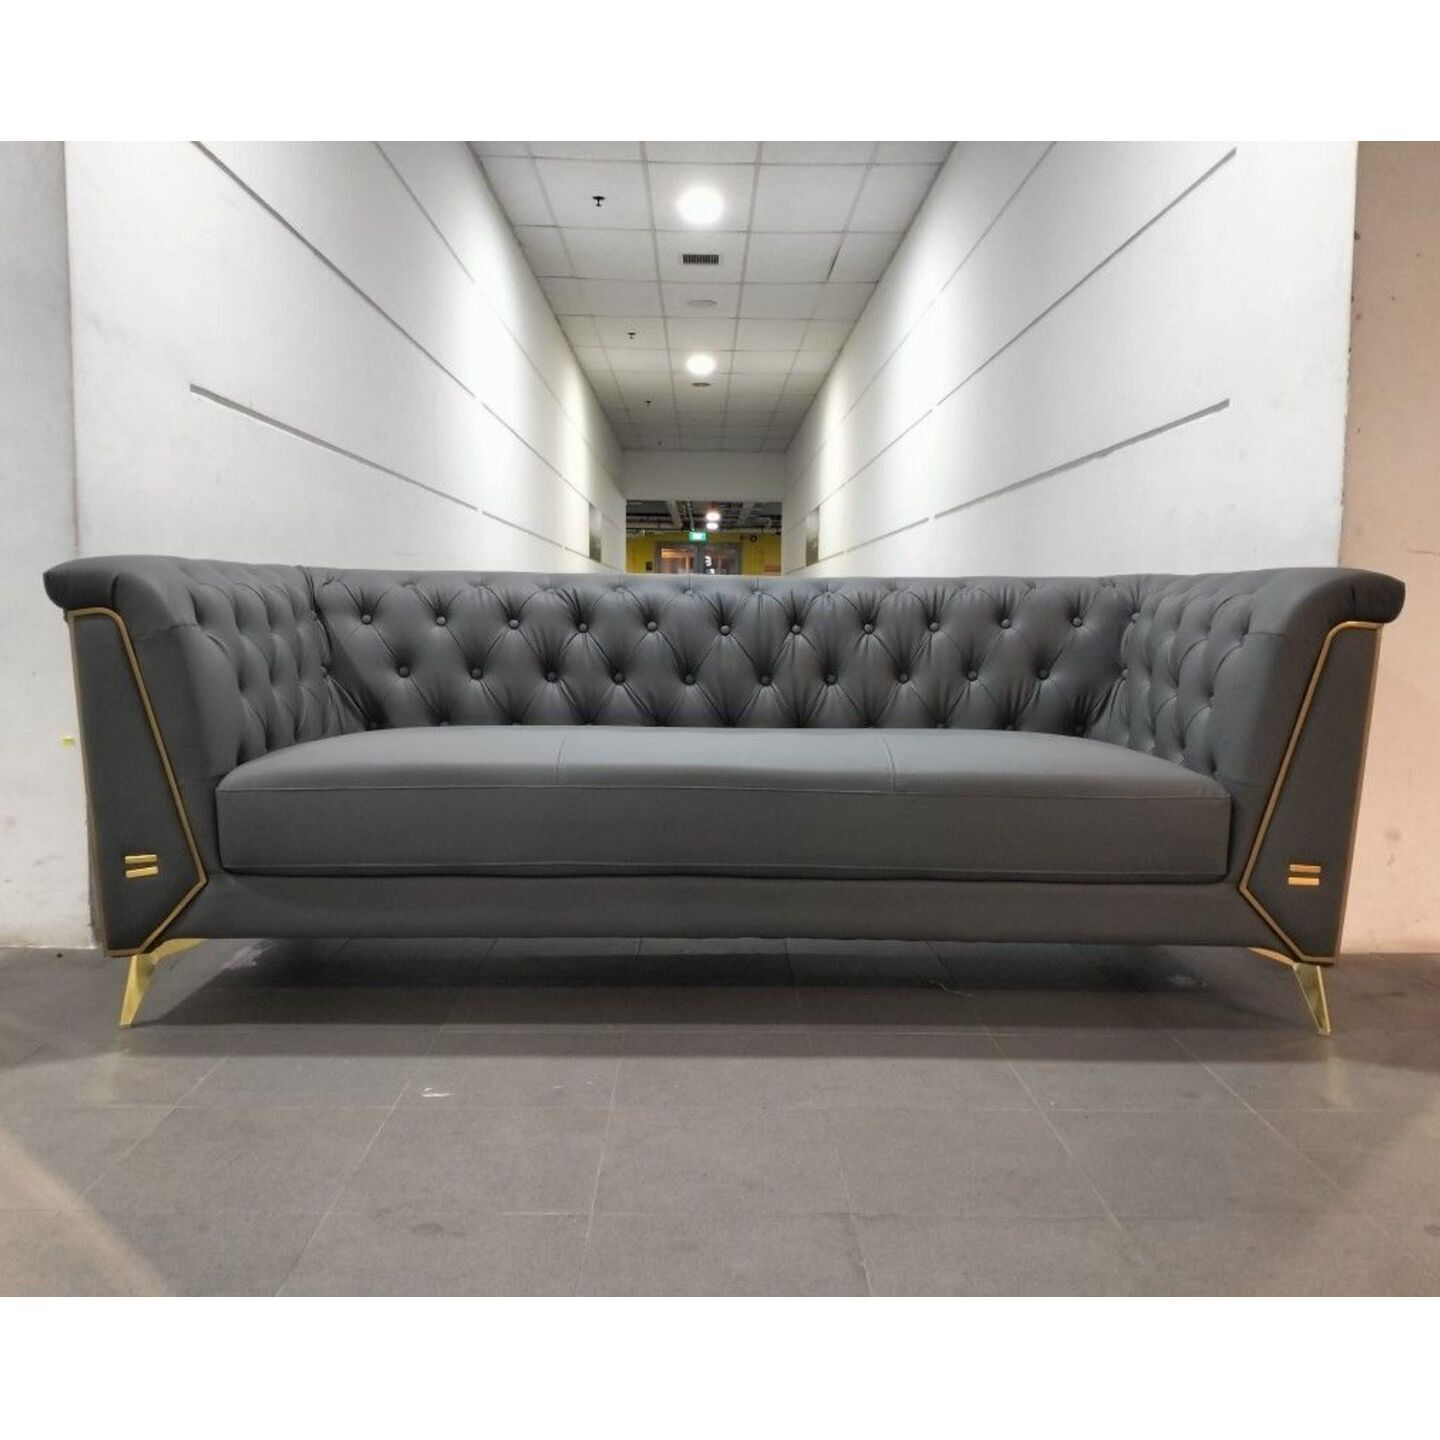 (CAT FRIENDLY) ROMANO GRANDEUR 3 Seater Chesterfield Sofa in STONE GREY TECH LEATHAIRE